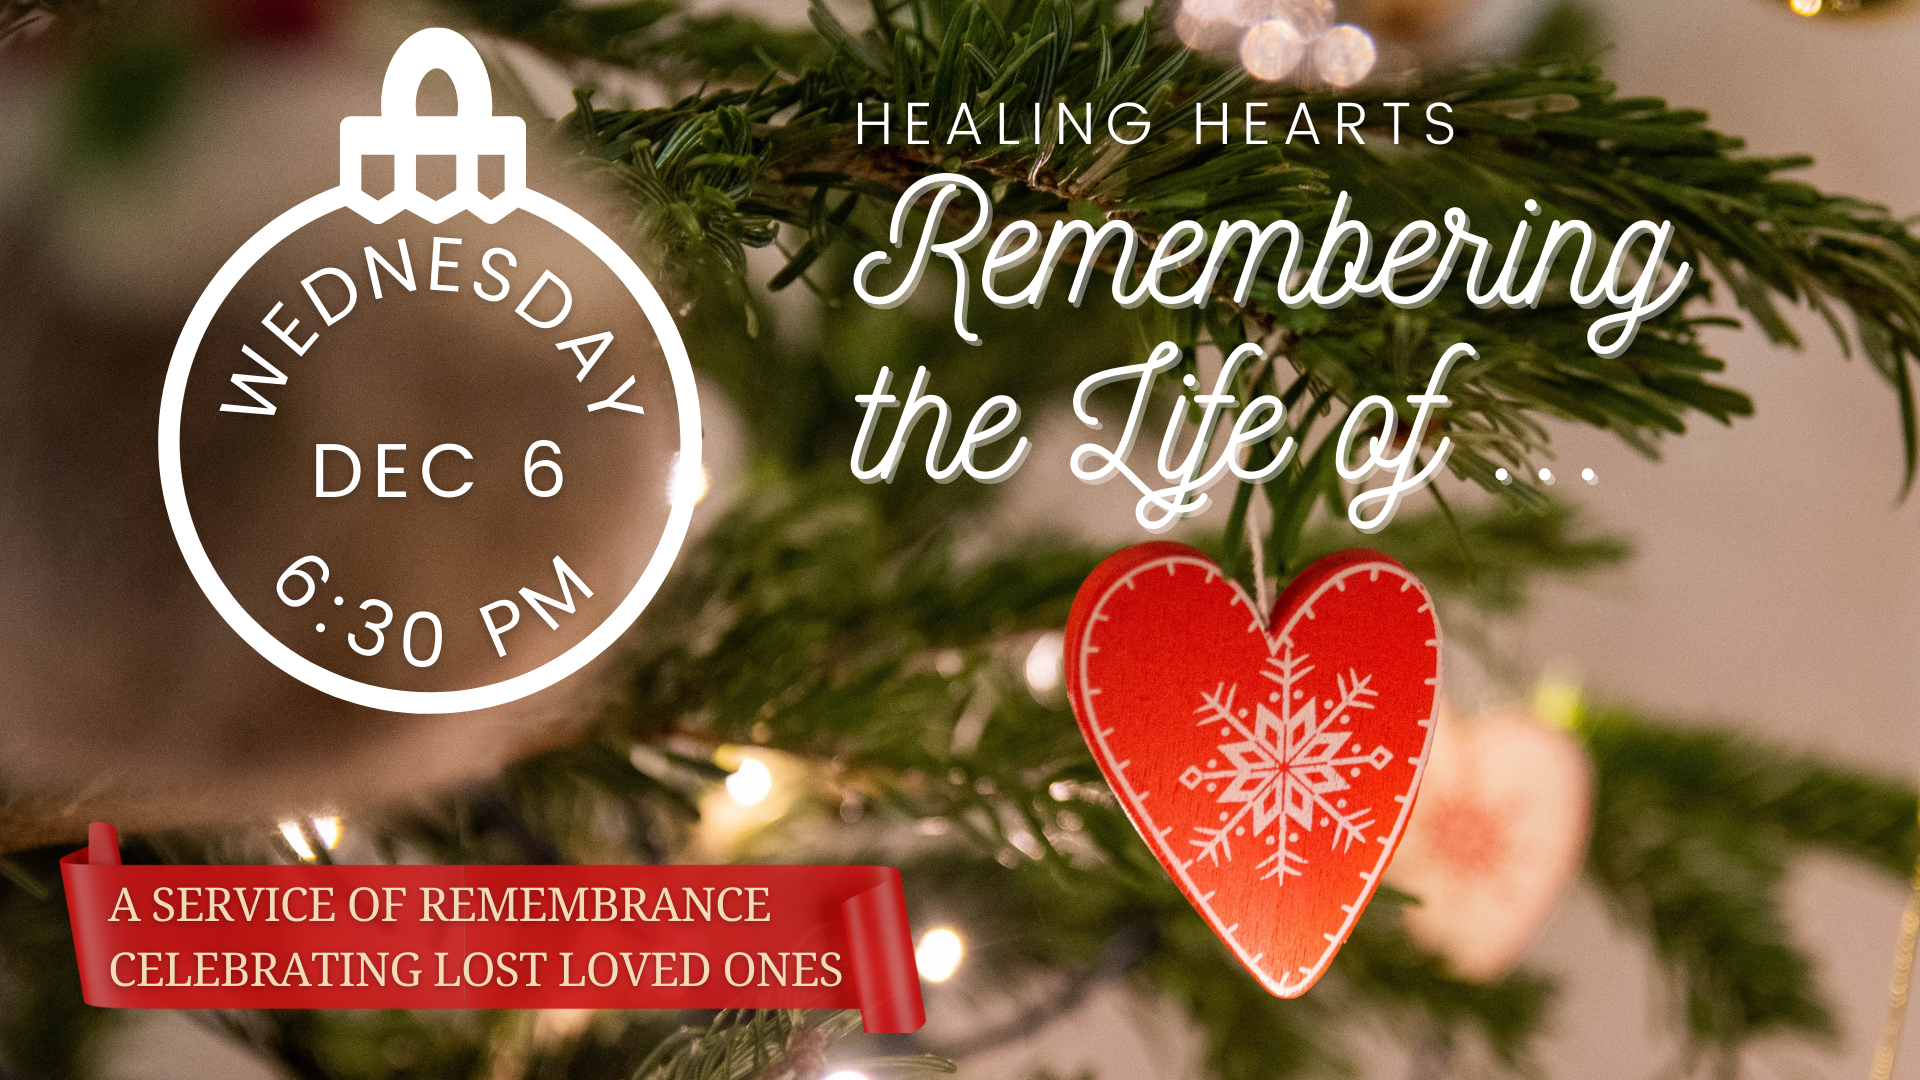 Wednesday- (Healing Hearts) Remembering the Life of...-Deuteronomy 30:11-20